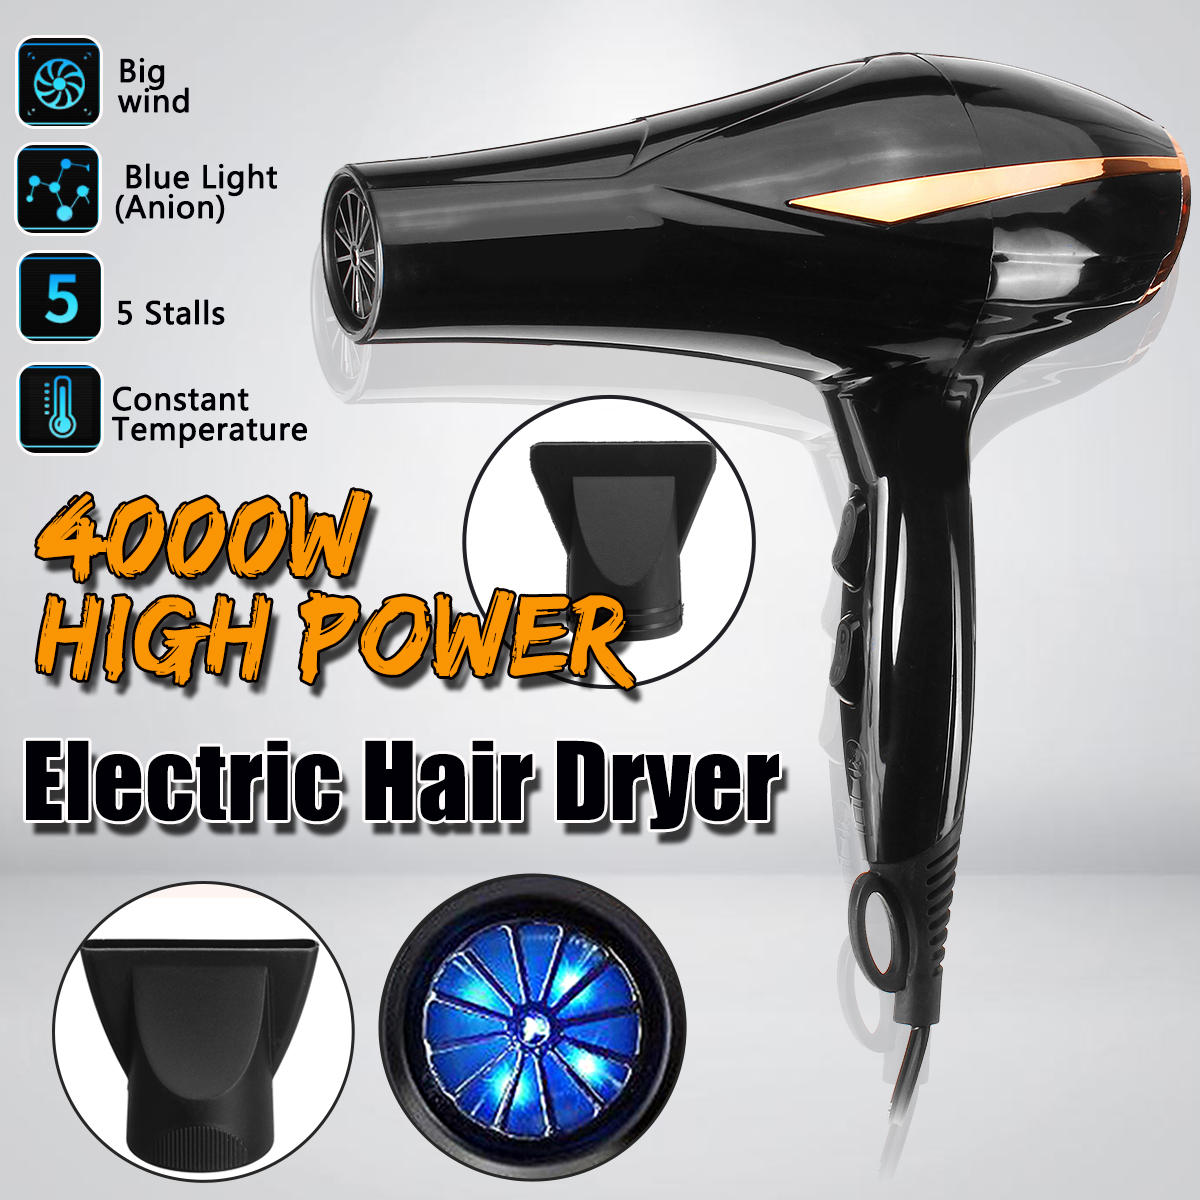 4000W-Professional-Hair-Dryer-Hot-amp-Cold-Blue-Light-Ionic-Blow-Fast-Heating-Large-Power-1445664